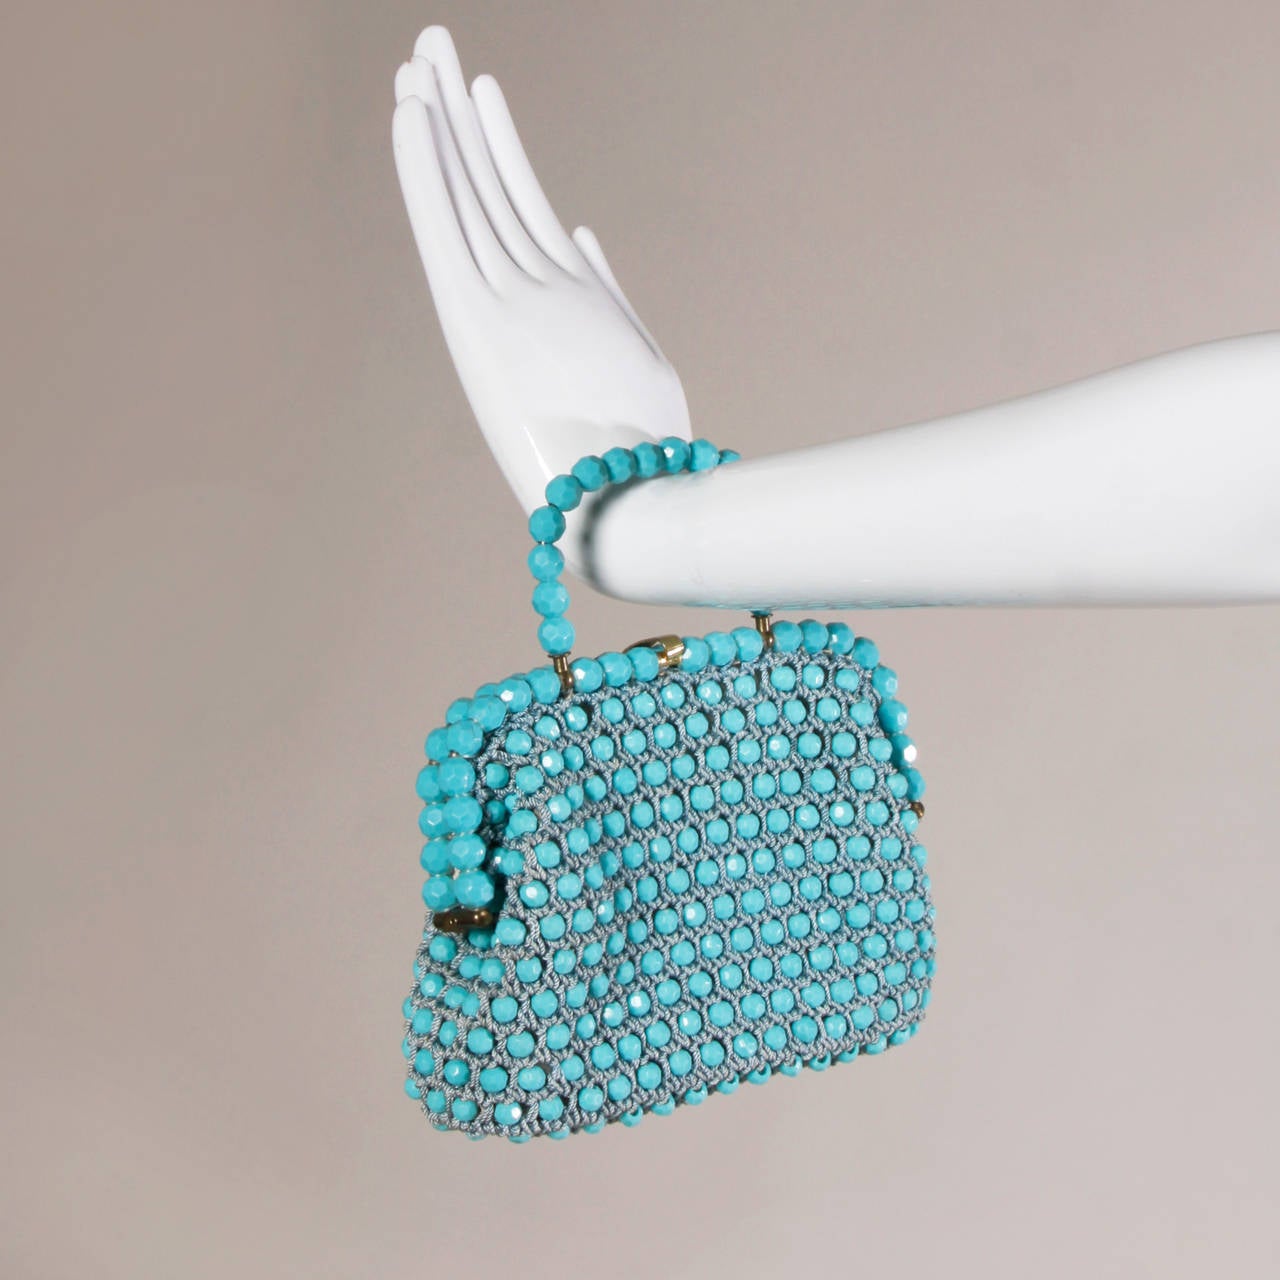 Wonderful robin's egg blue beaded cord bag by Harry Rosenfeld. Gorgeous construction and condition!

Details:

Fully Lined
Inside Pocket
Top Clasp Closure
Color: Robin's Egg Blue/ Gray Blue/ Gold
Material: Beads/ Rope/ Gold Plated